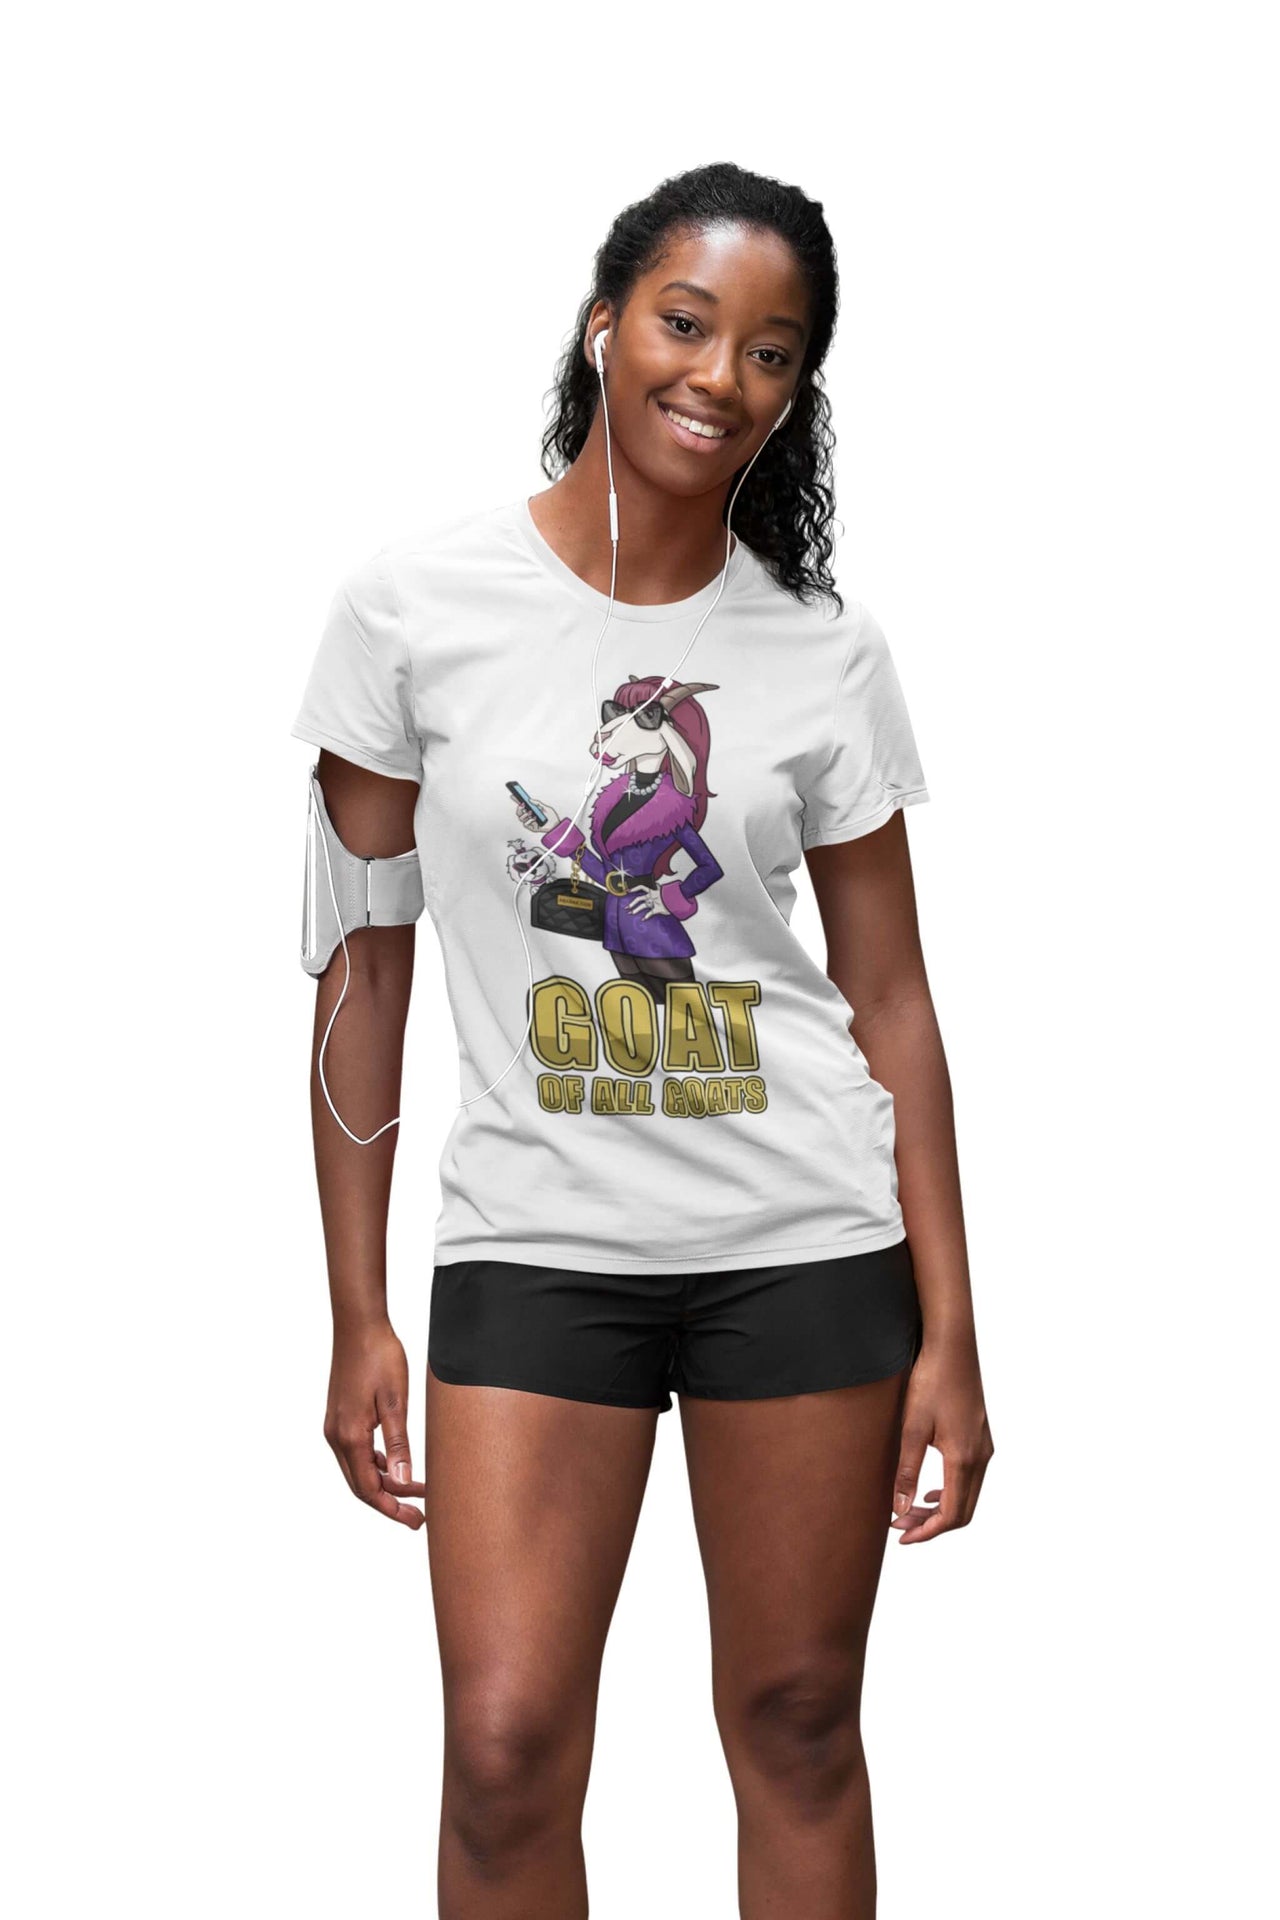 G.O.A.T of all Goats - Women's Vintage Tee